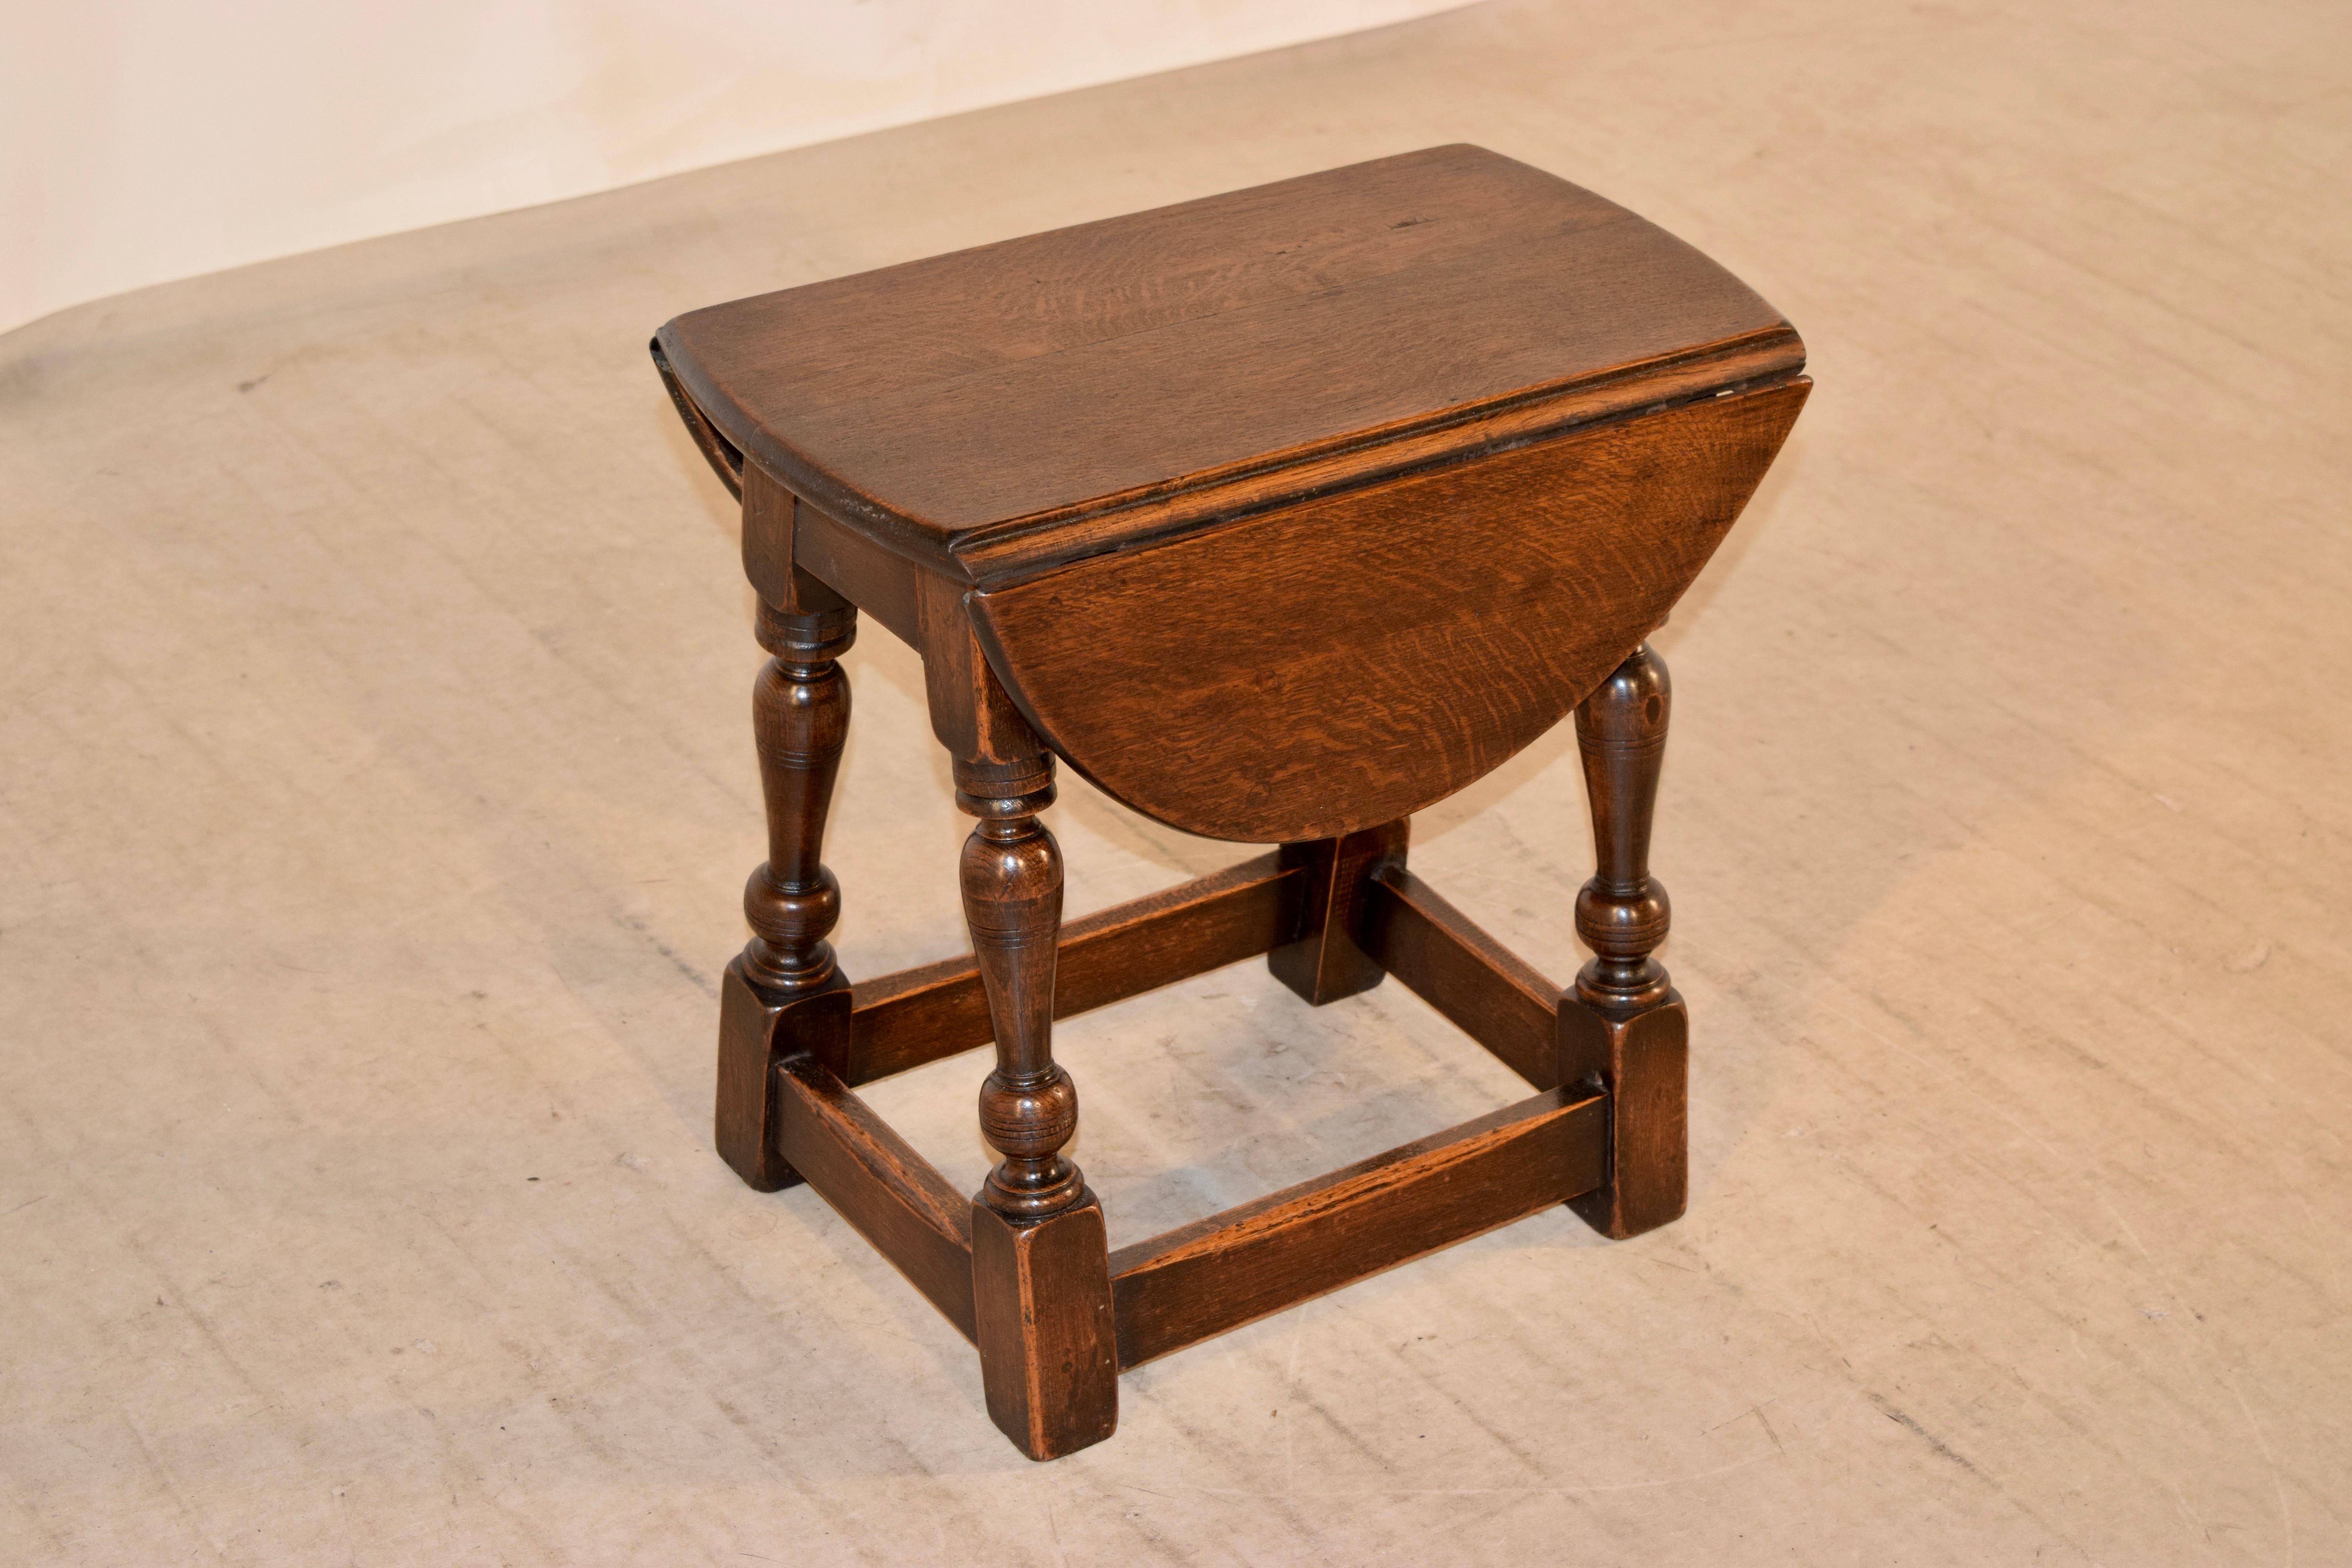 19th century small drop-leaf table from England made from oak. The top opens and turns to measure 25.25 x 19 inches. The top is supported on a base which has a simple apron and gently splayed turned legs, joined by simple stretchers.